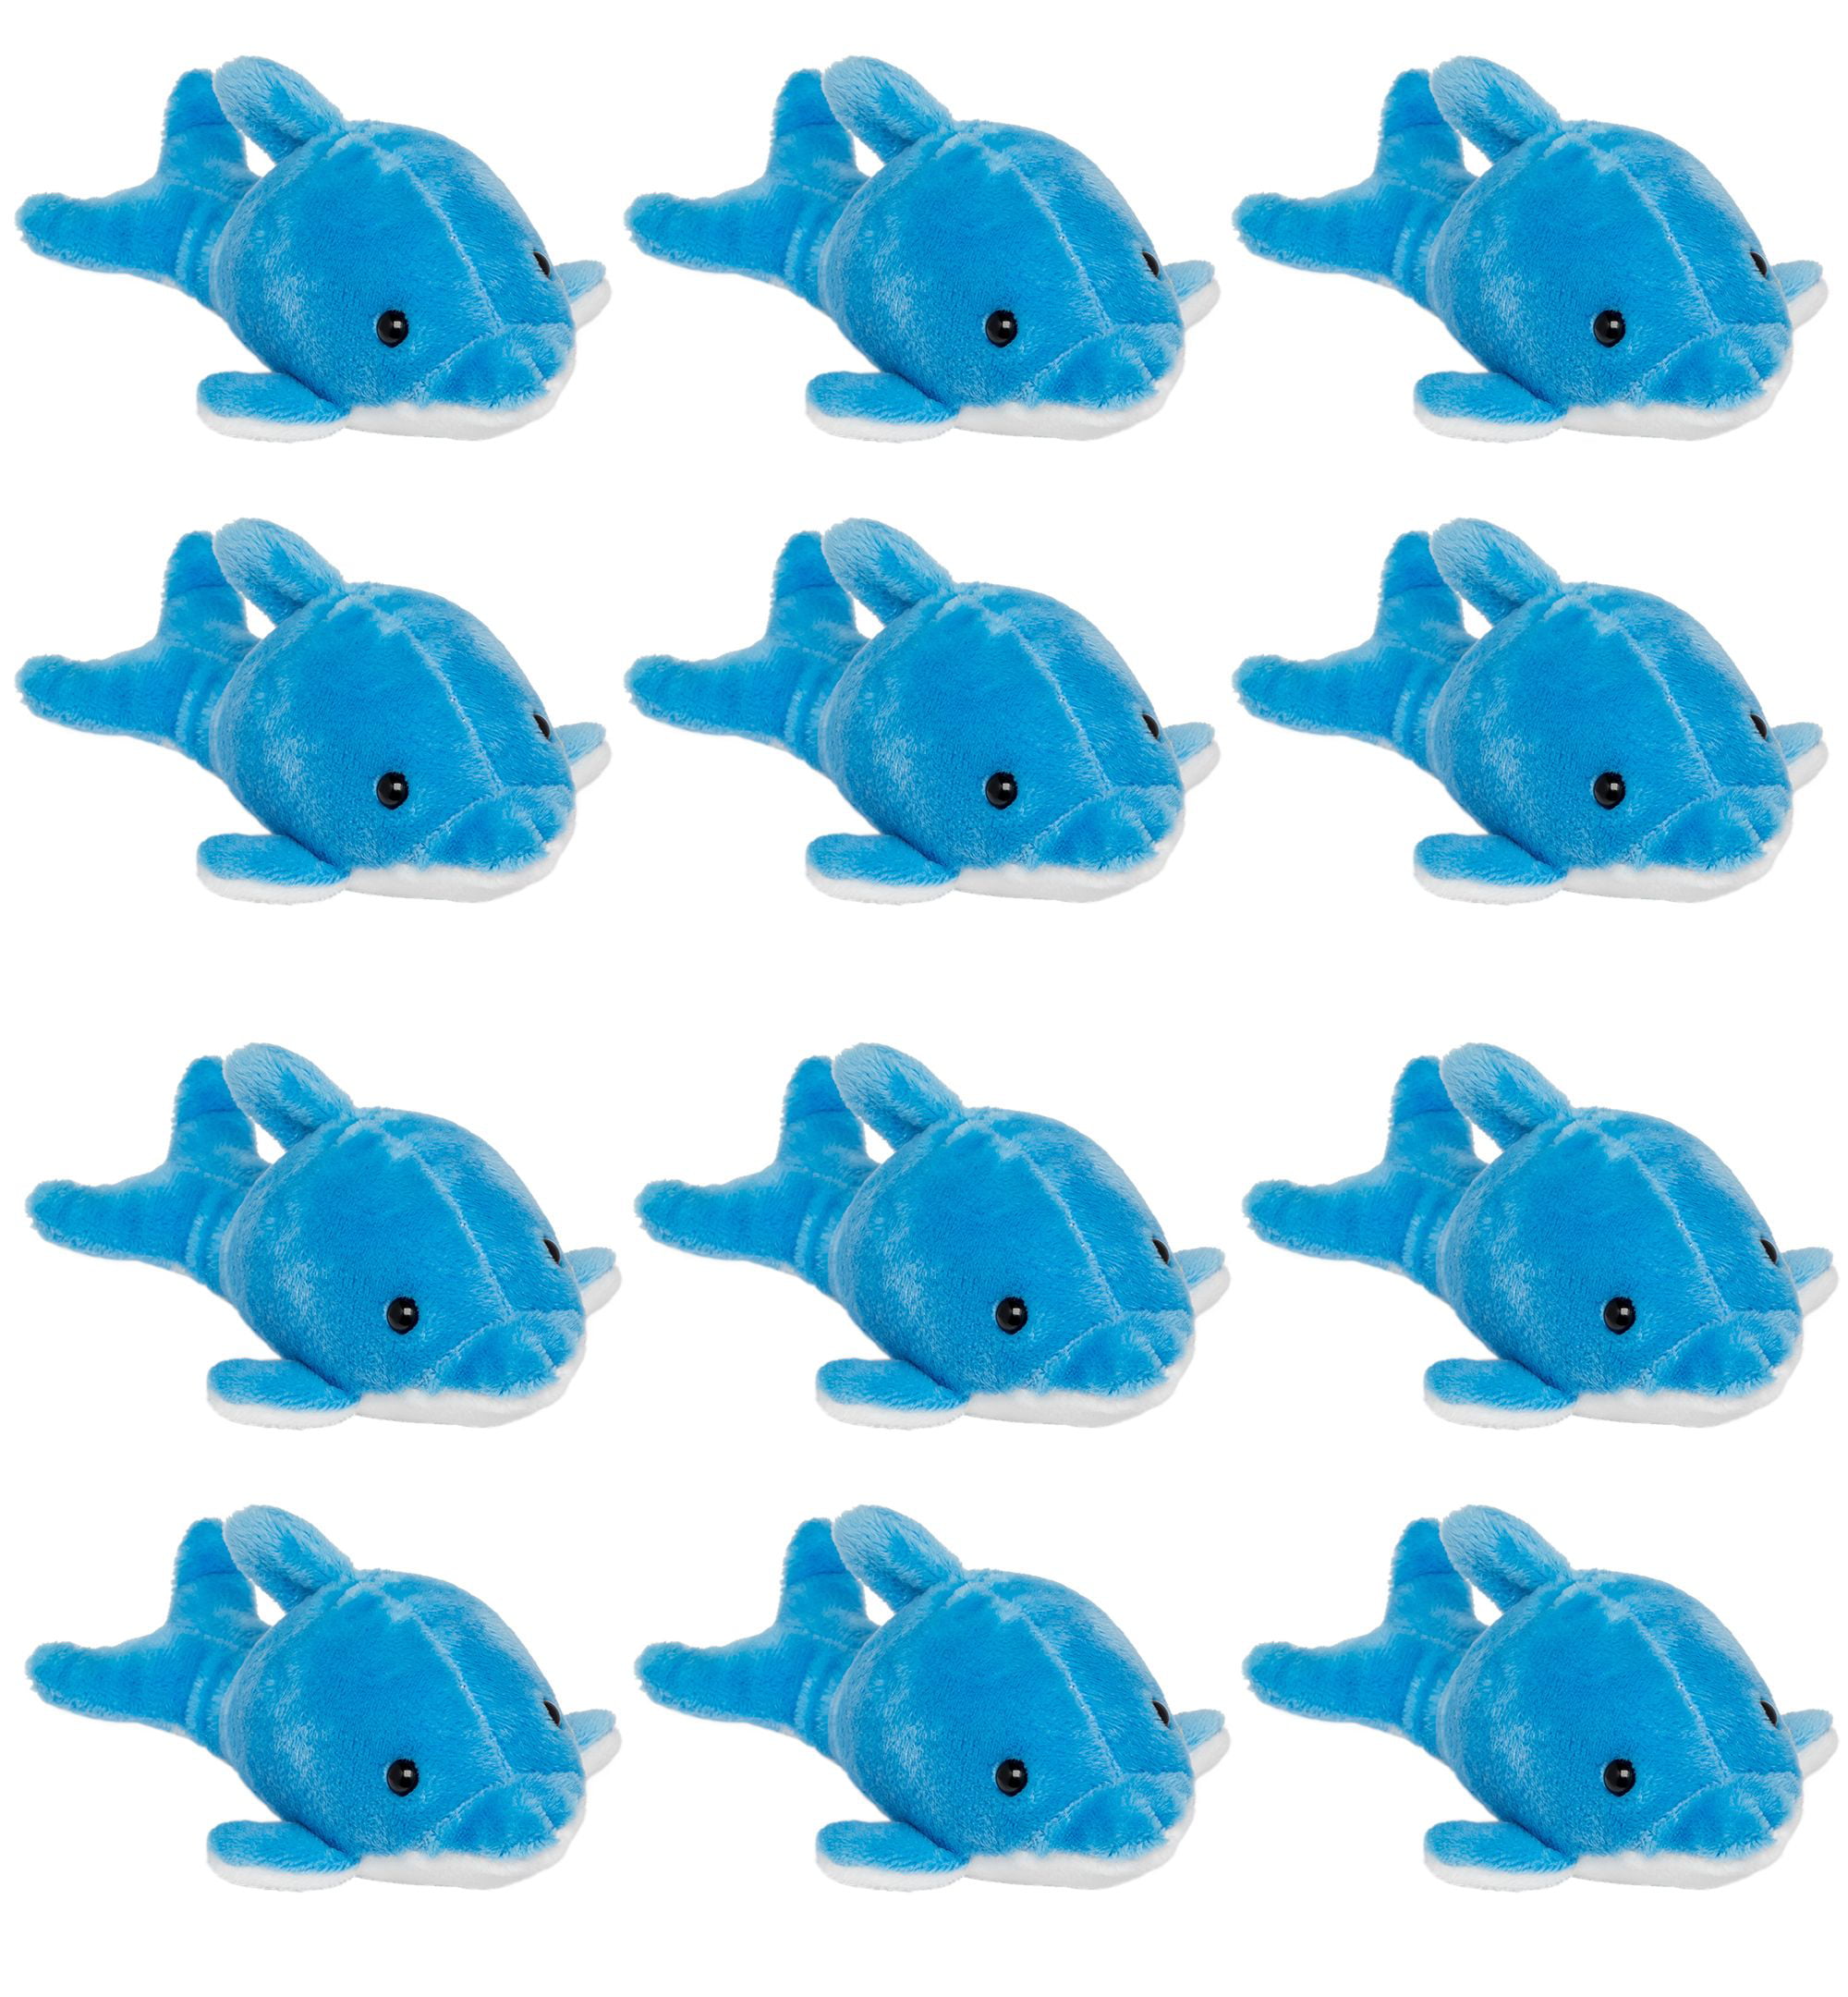 Wildlife Tree 3.5 Inch Blue Dolphin Mini Small Stuffed Animals Bulk Bundle of Ocean Animal Toys or Sea Party Favors for Kids Pack of 12